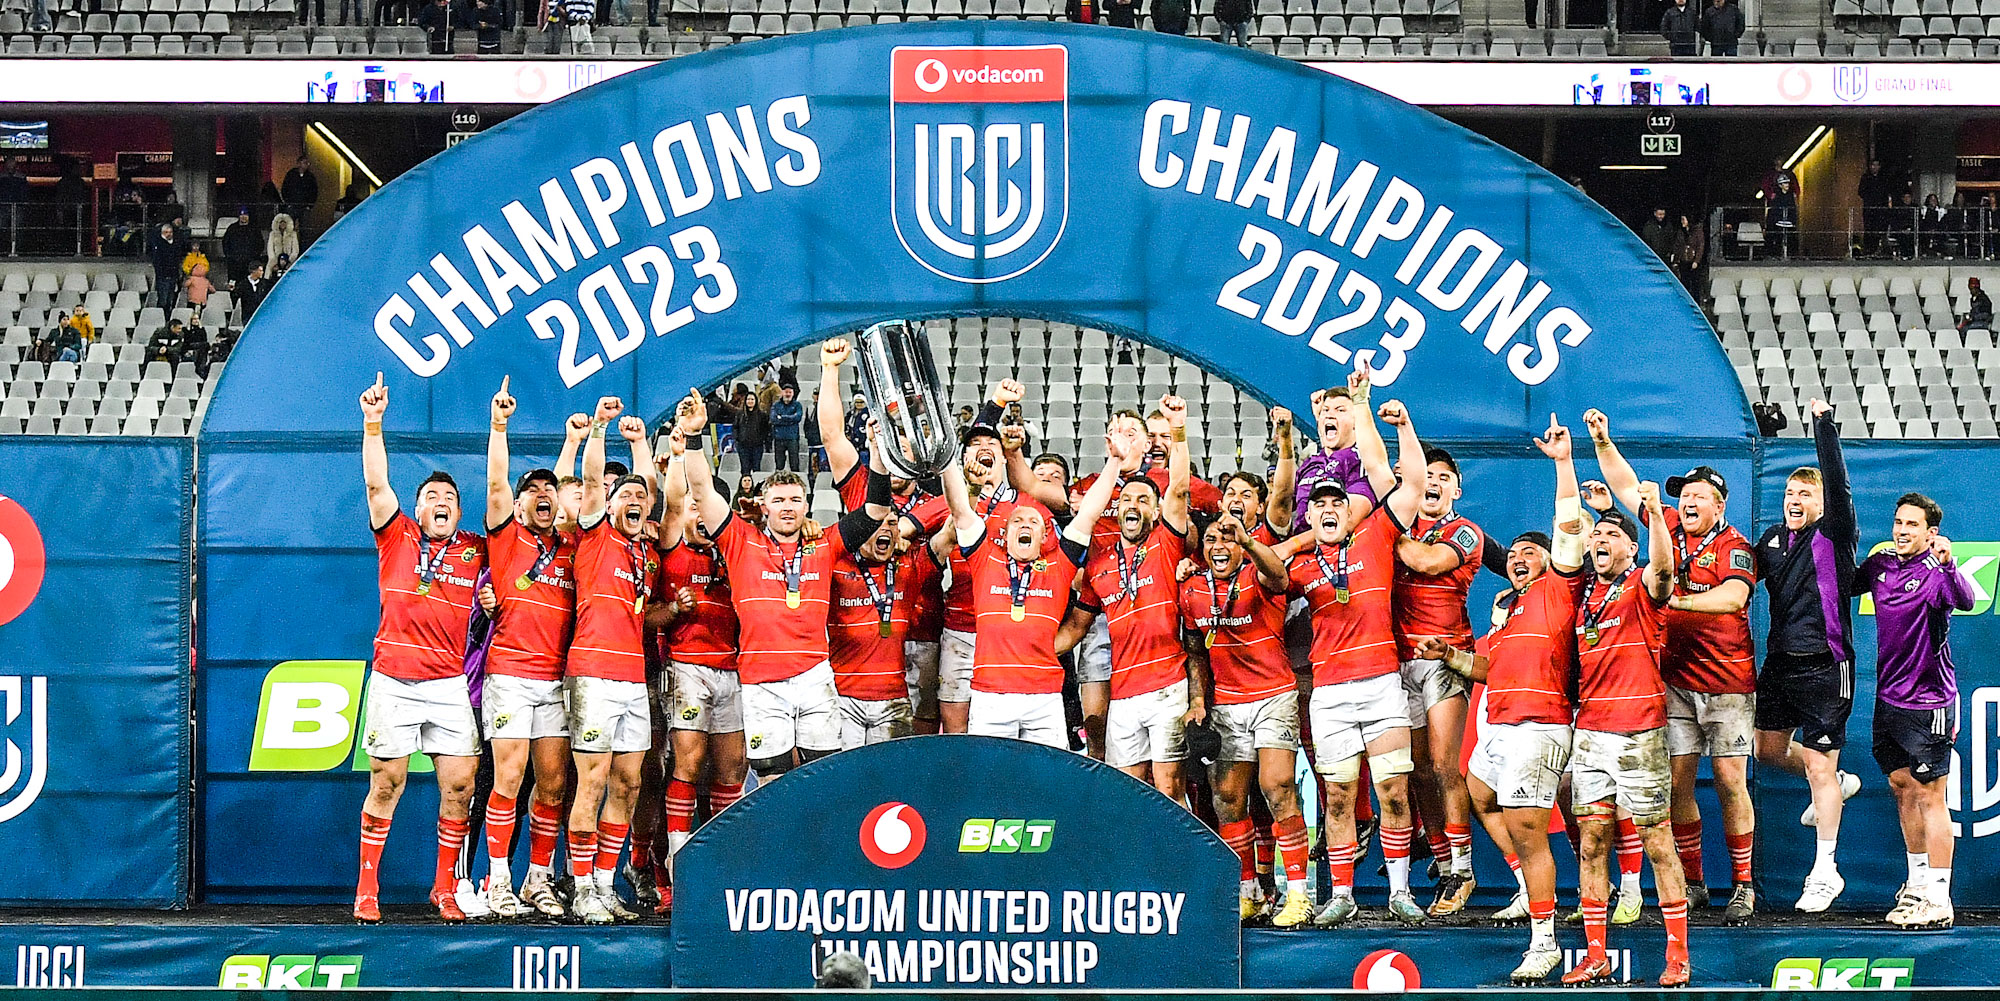 VODACOM UNITED RUGBY CHAMPIONSHIP SA Rugby